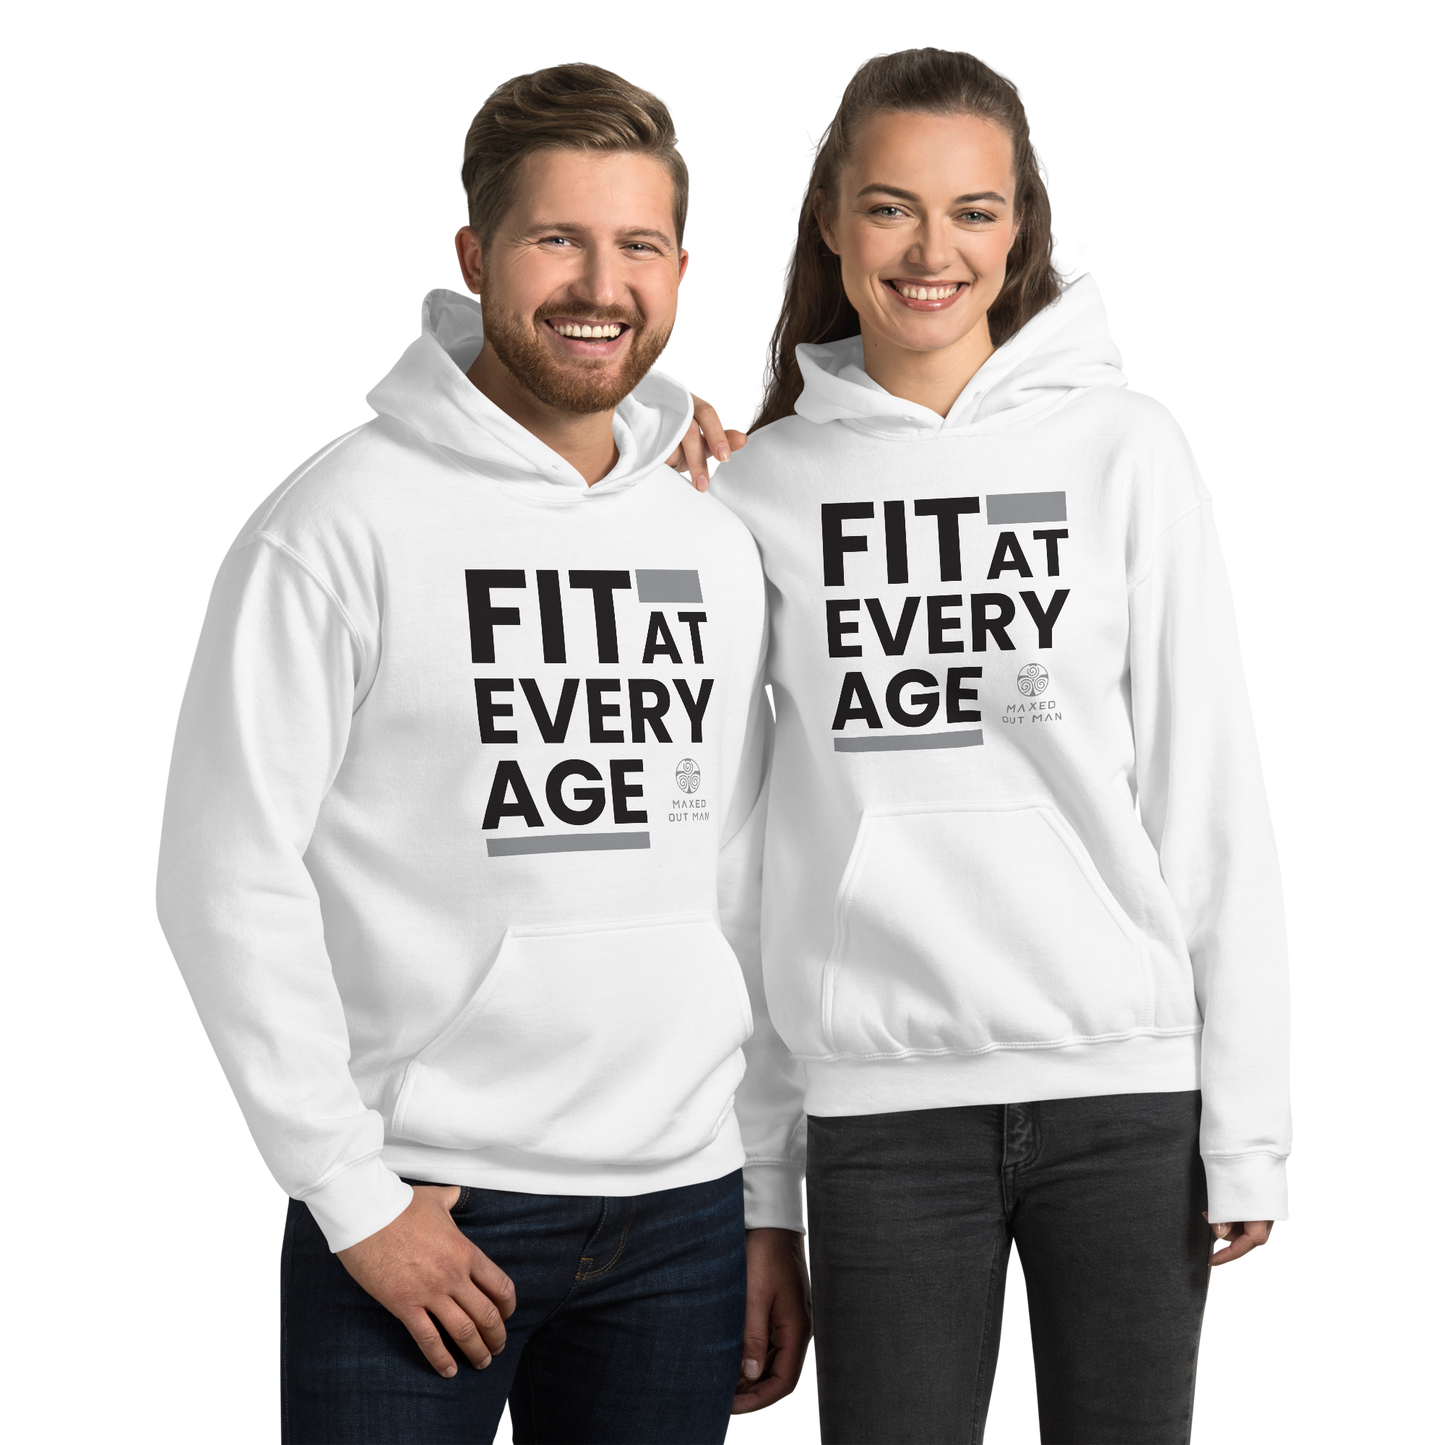 Fit at Every Age Unisex Hoodie - Lighter Colors